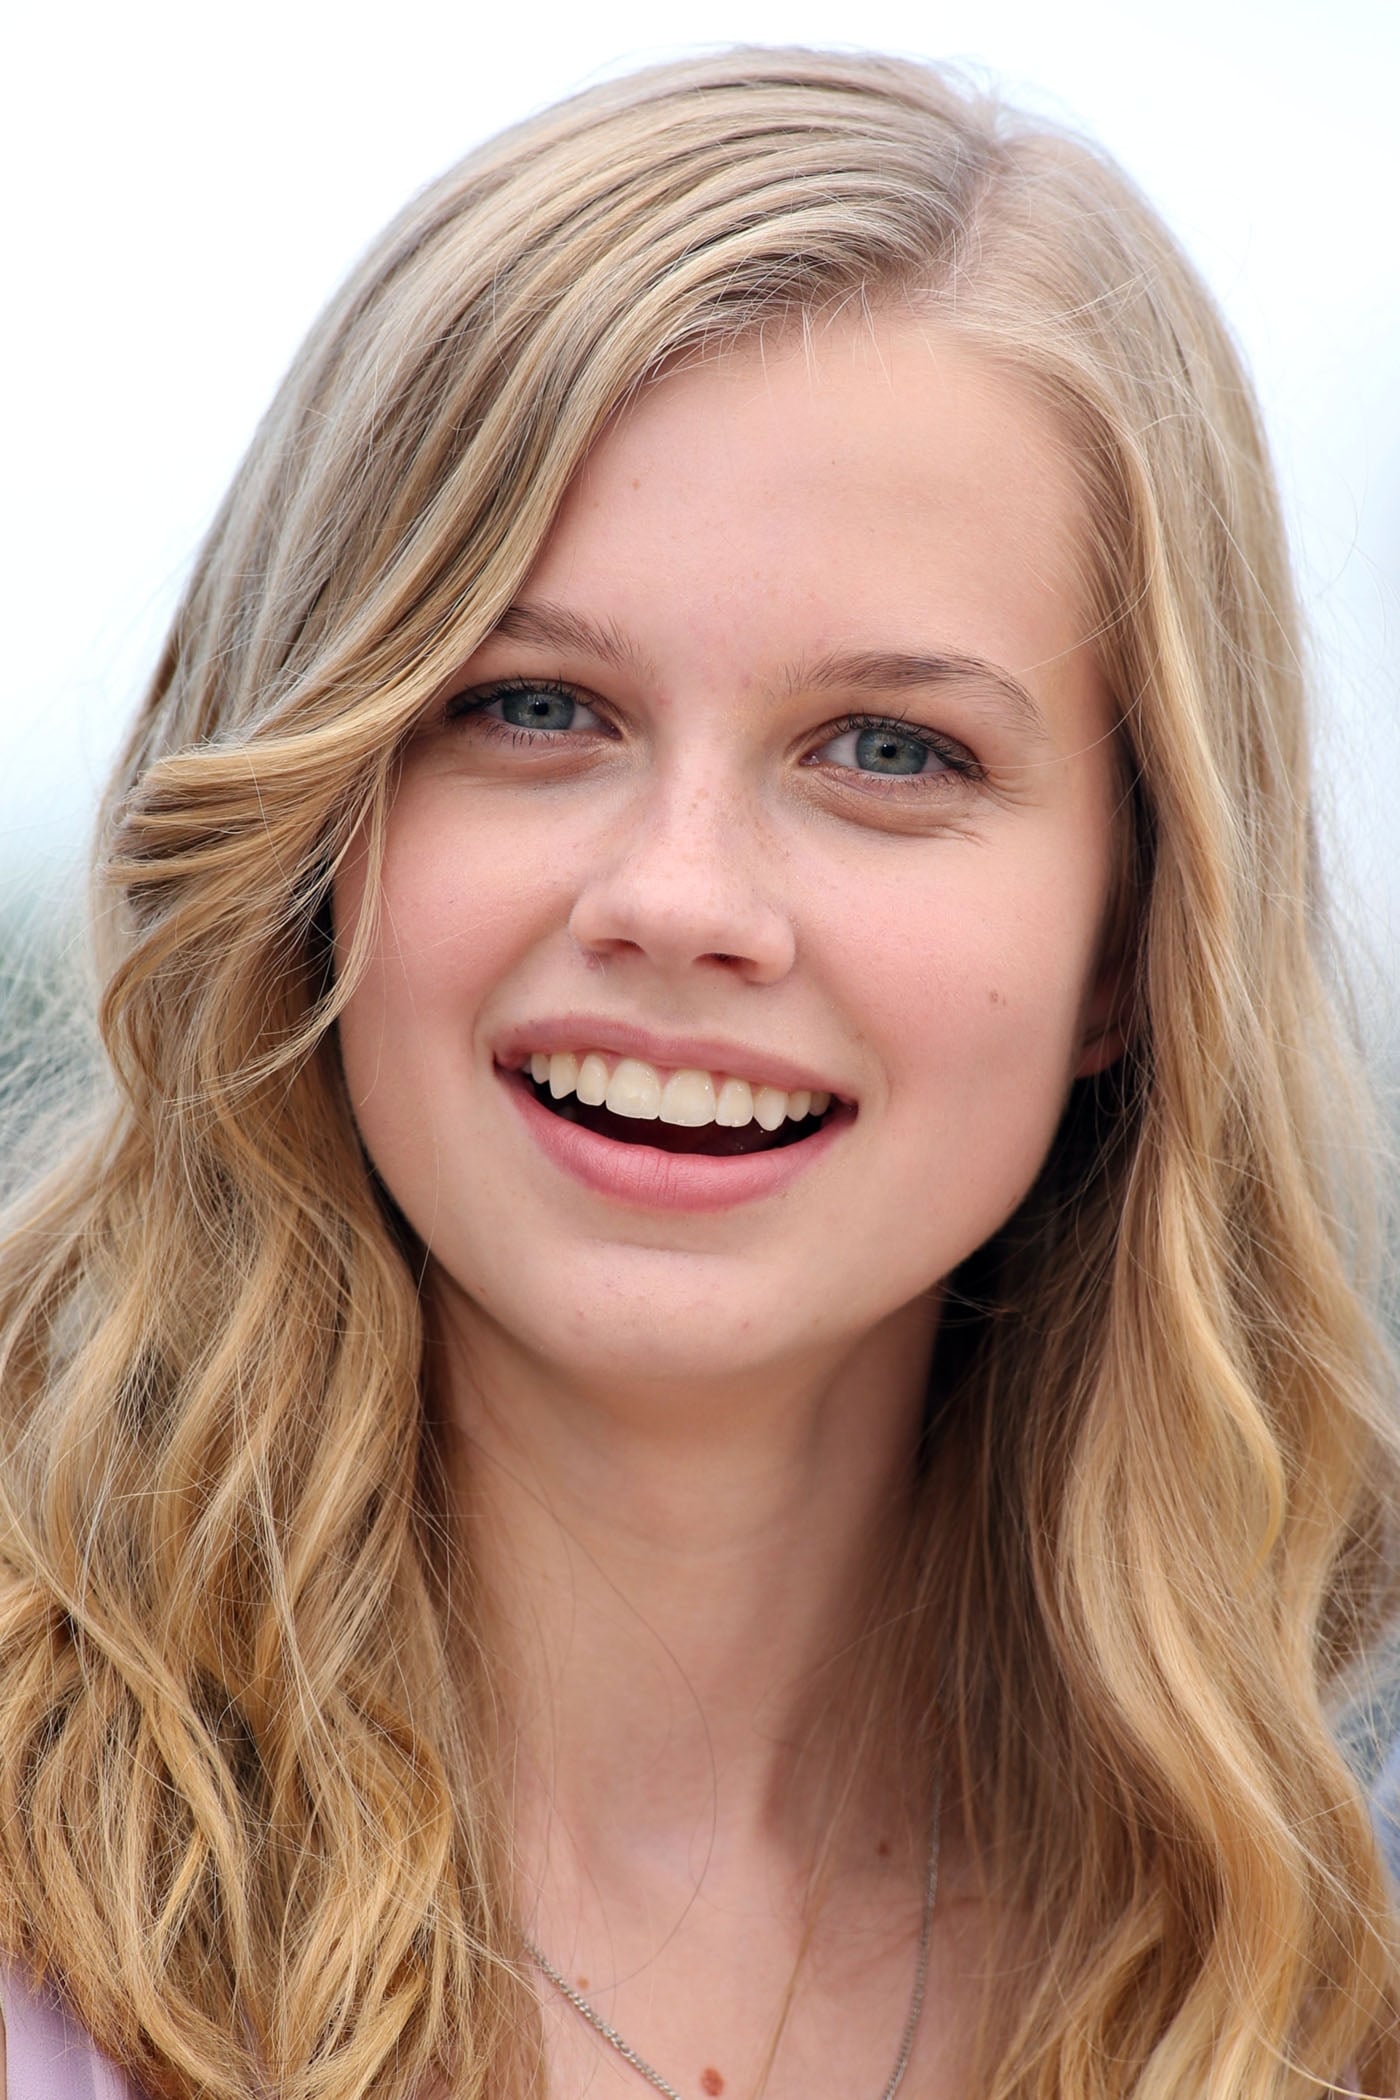 Angourie Rice Awesome Profile Pics - Whatsapp Images